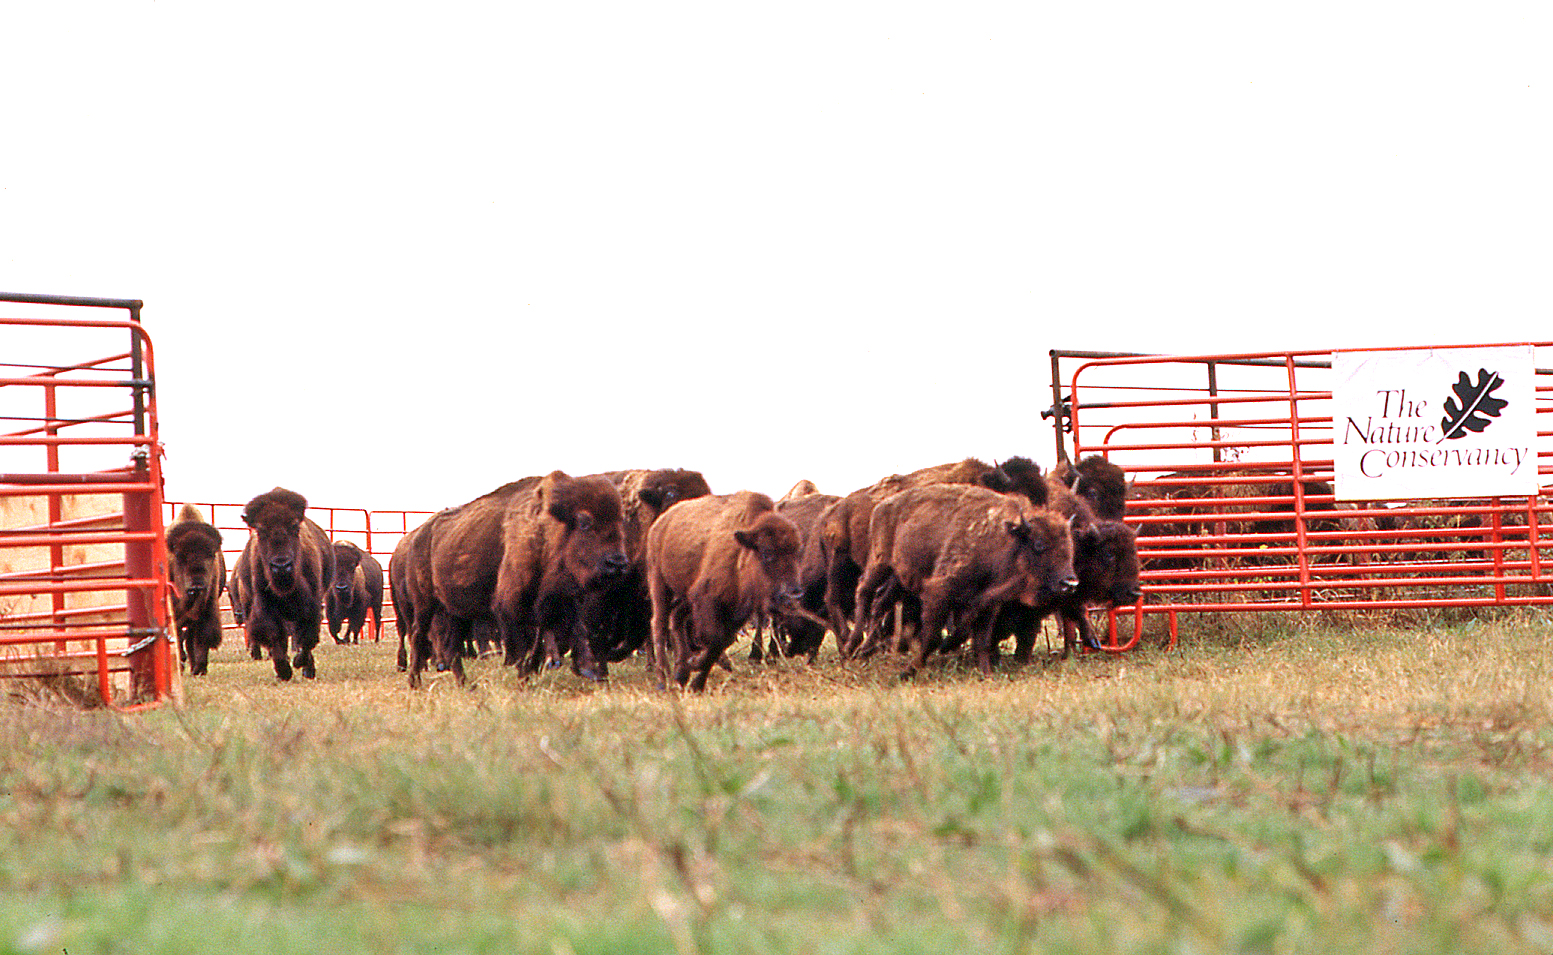 A herd of bison en route from their corral to the open prairie. 